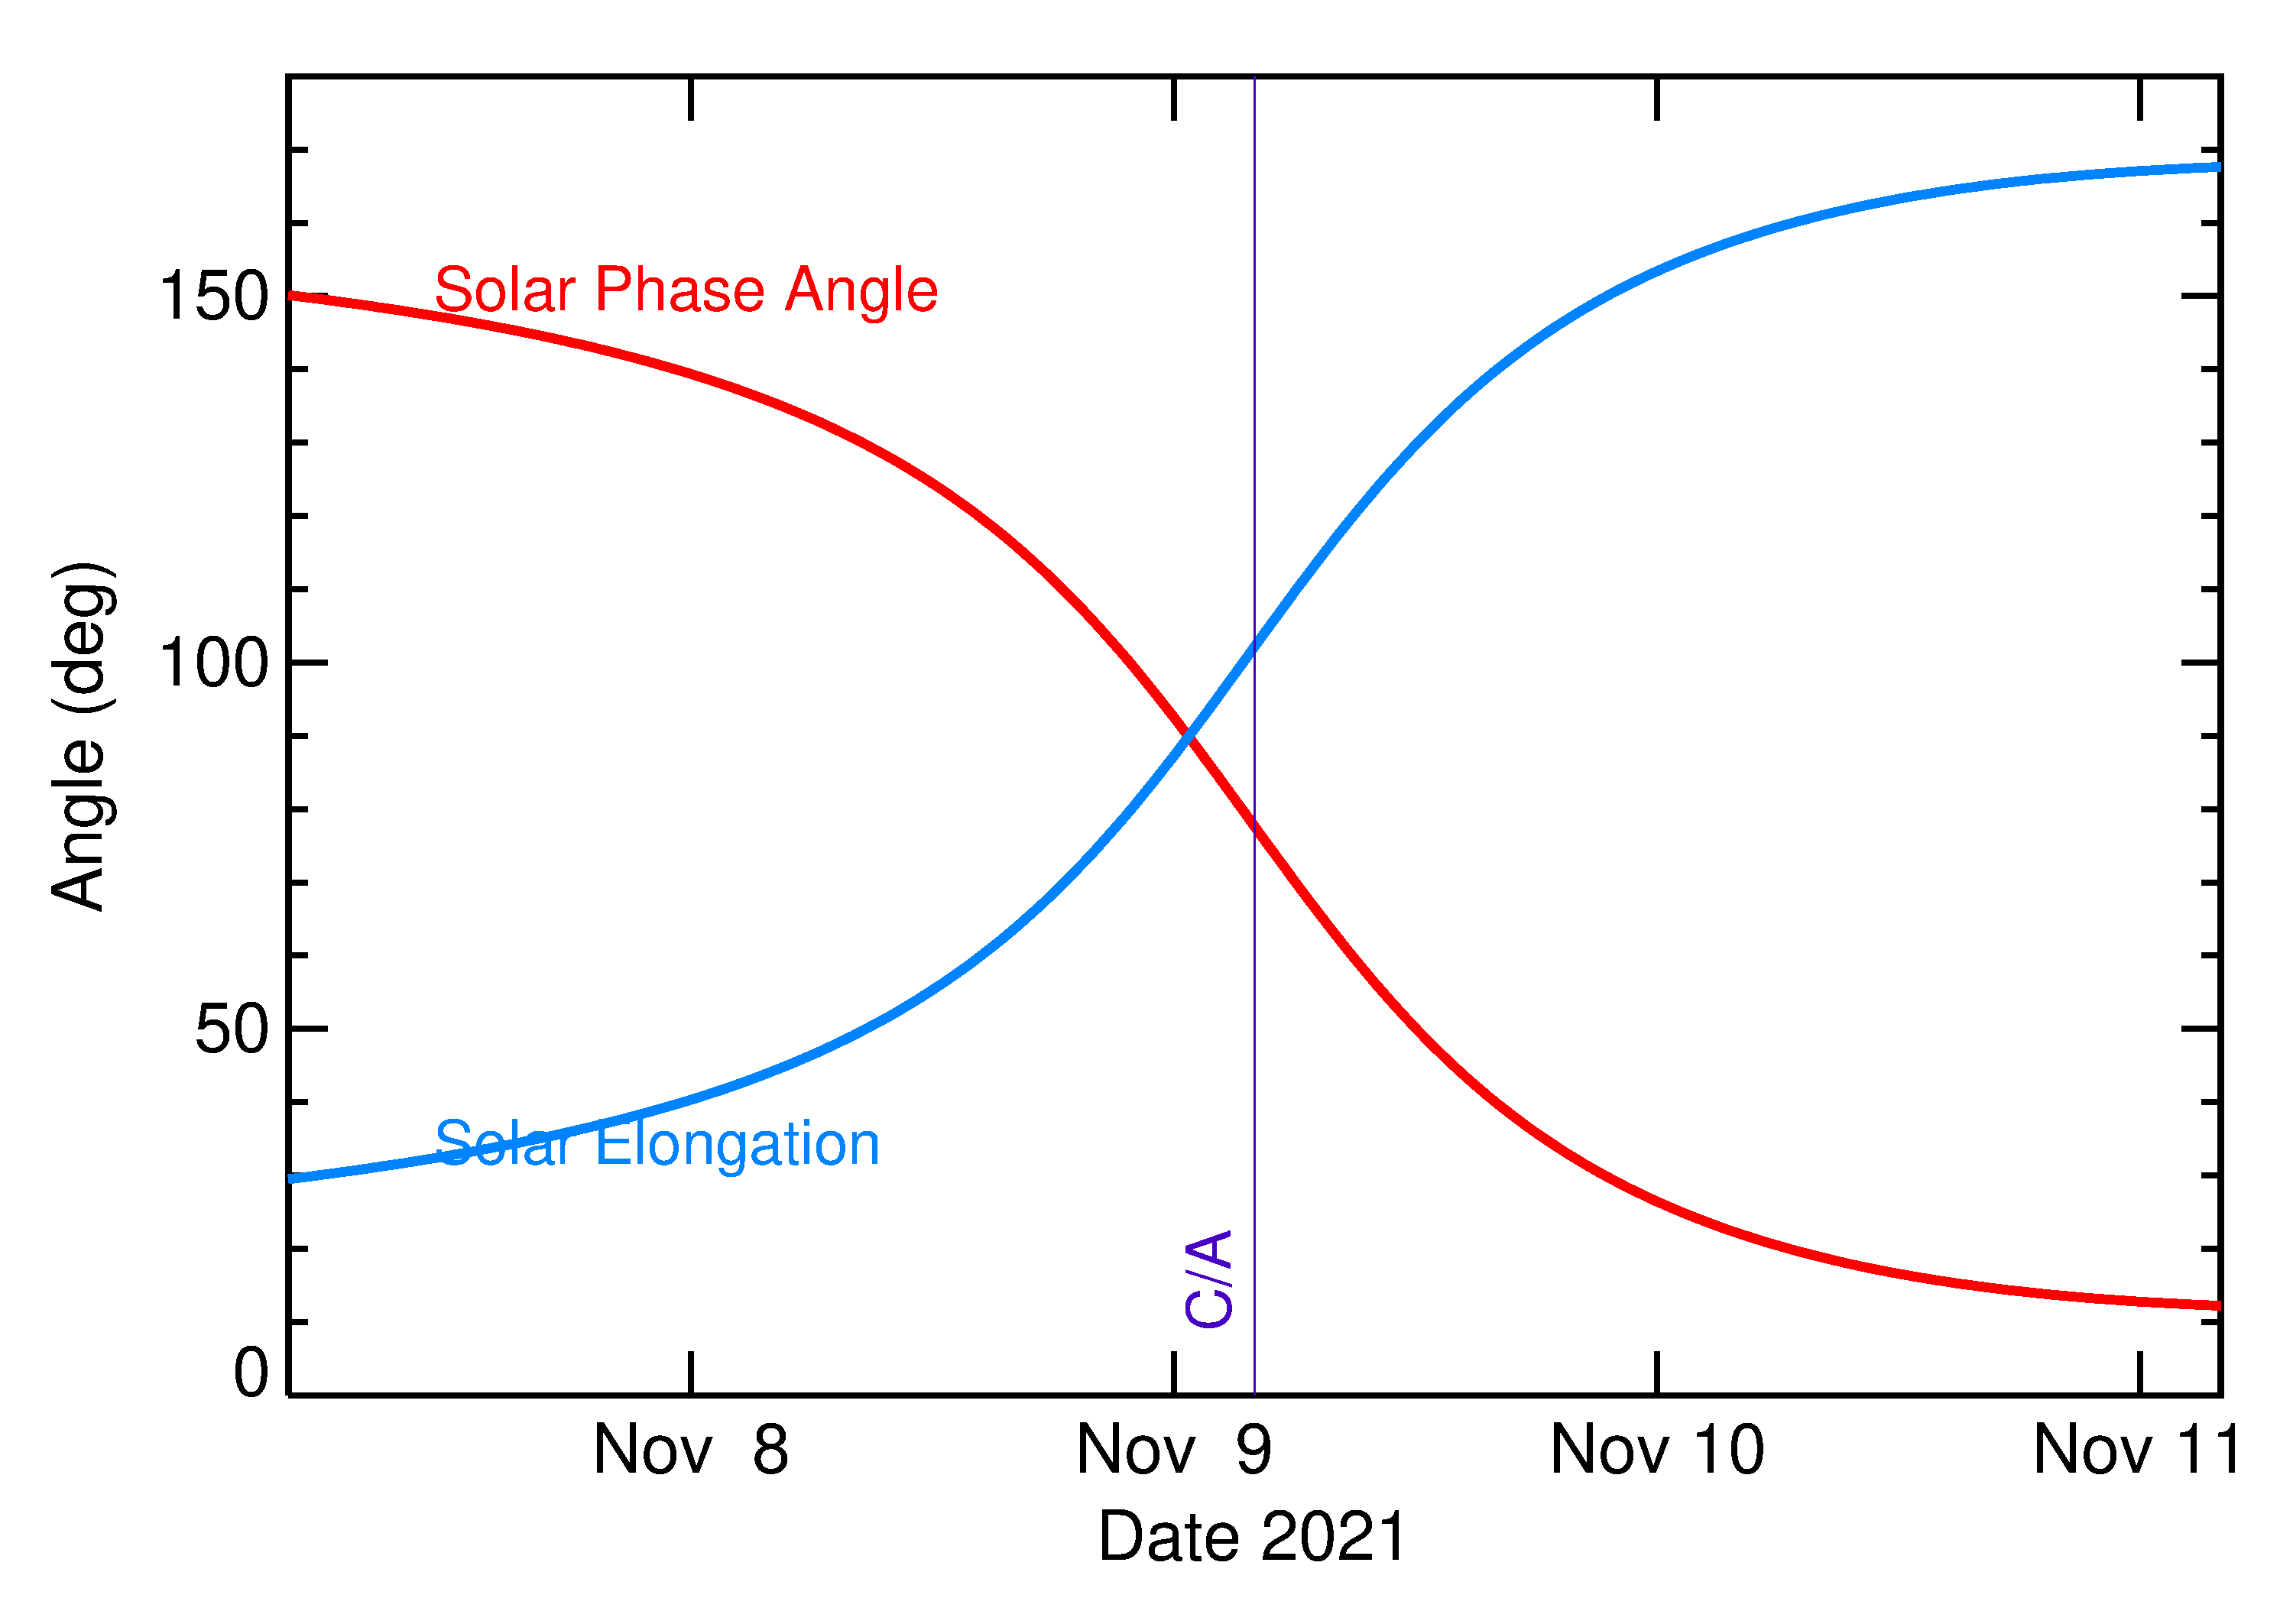 2021 Solar Elongation and Phase Angle - Expanded view